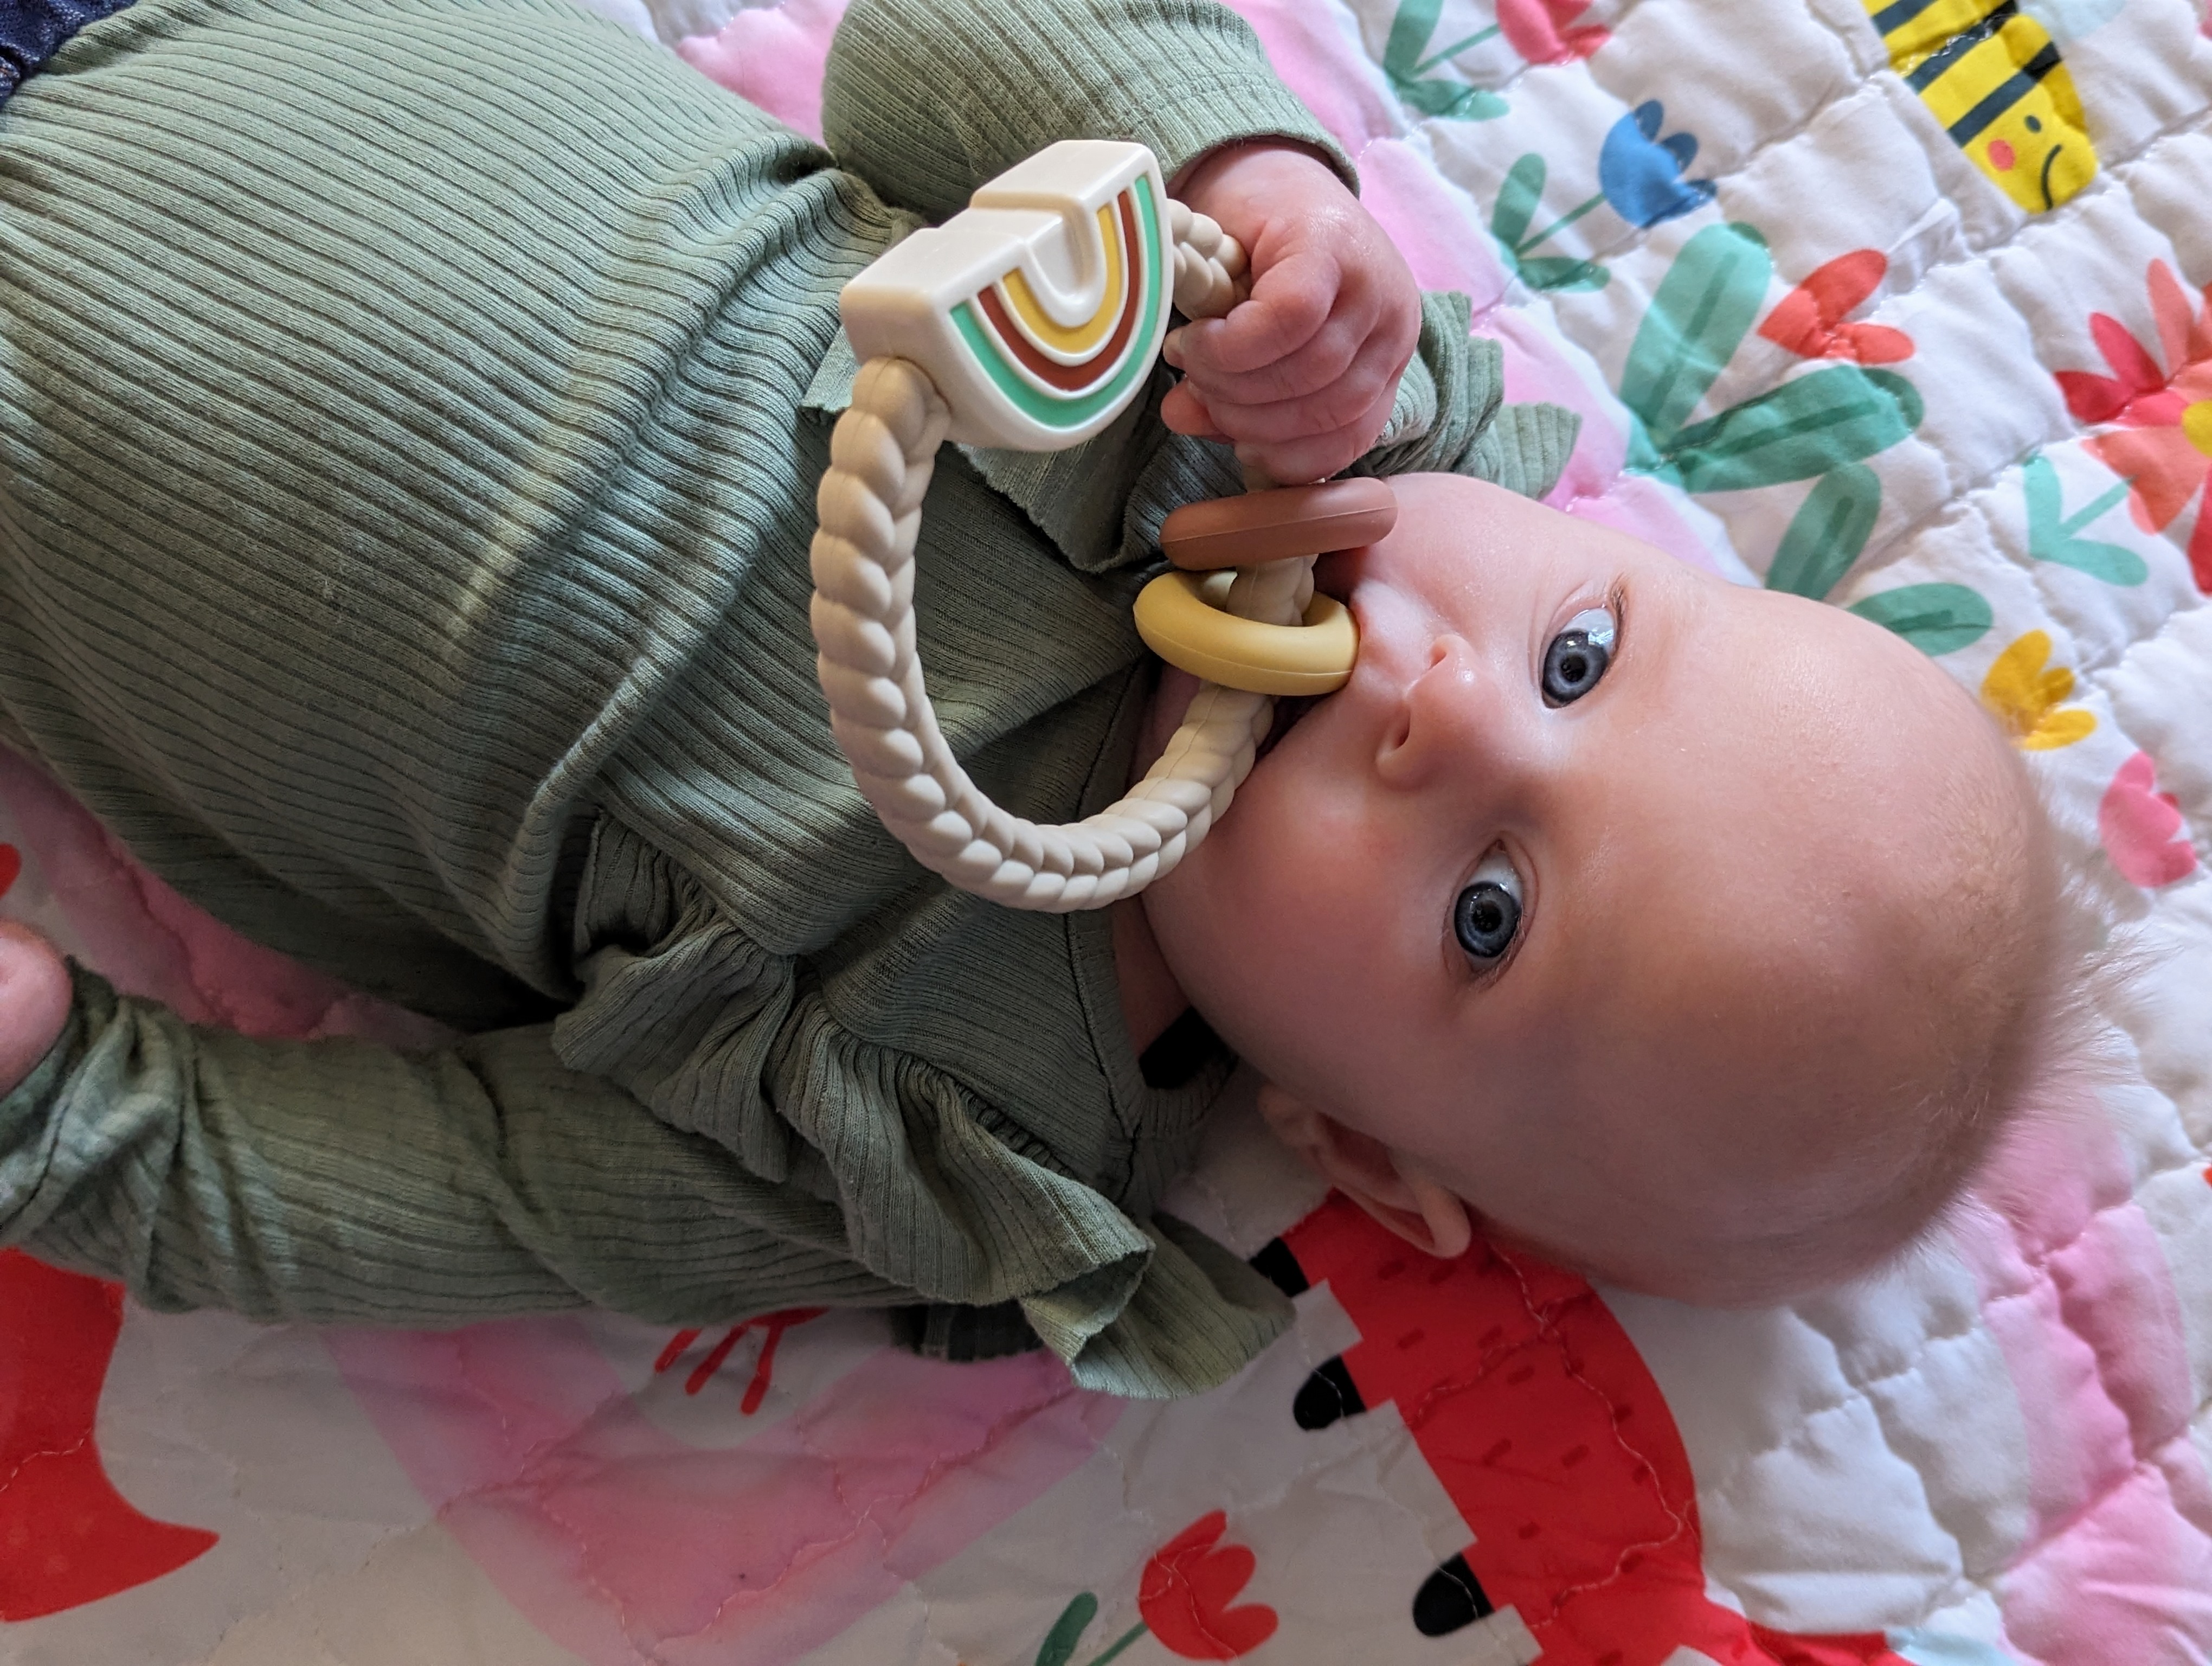 A baby in a green top holds a beige rattle toy to her month while laying on a pink blanket.